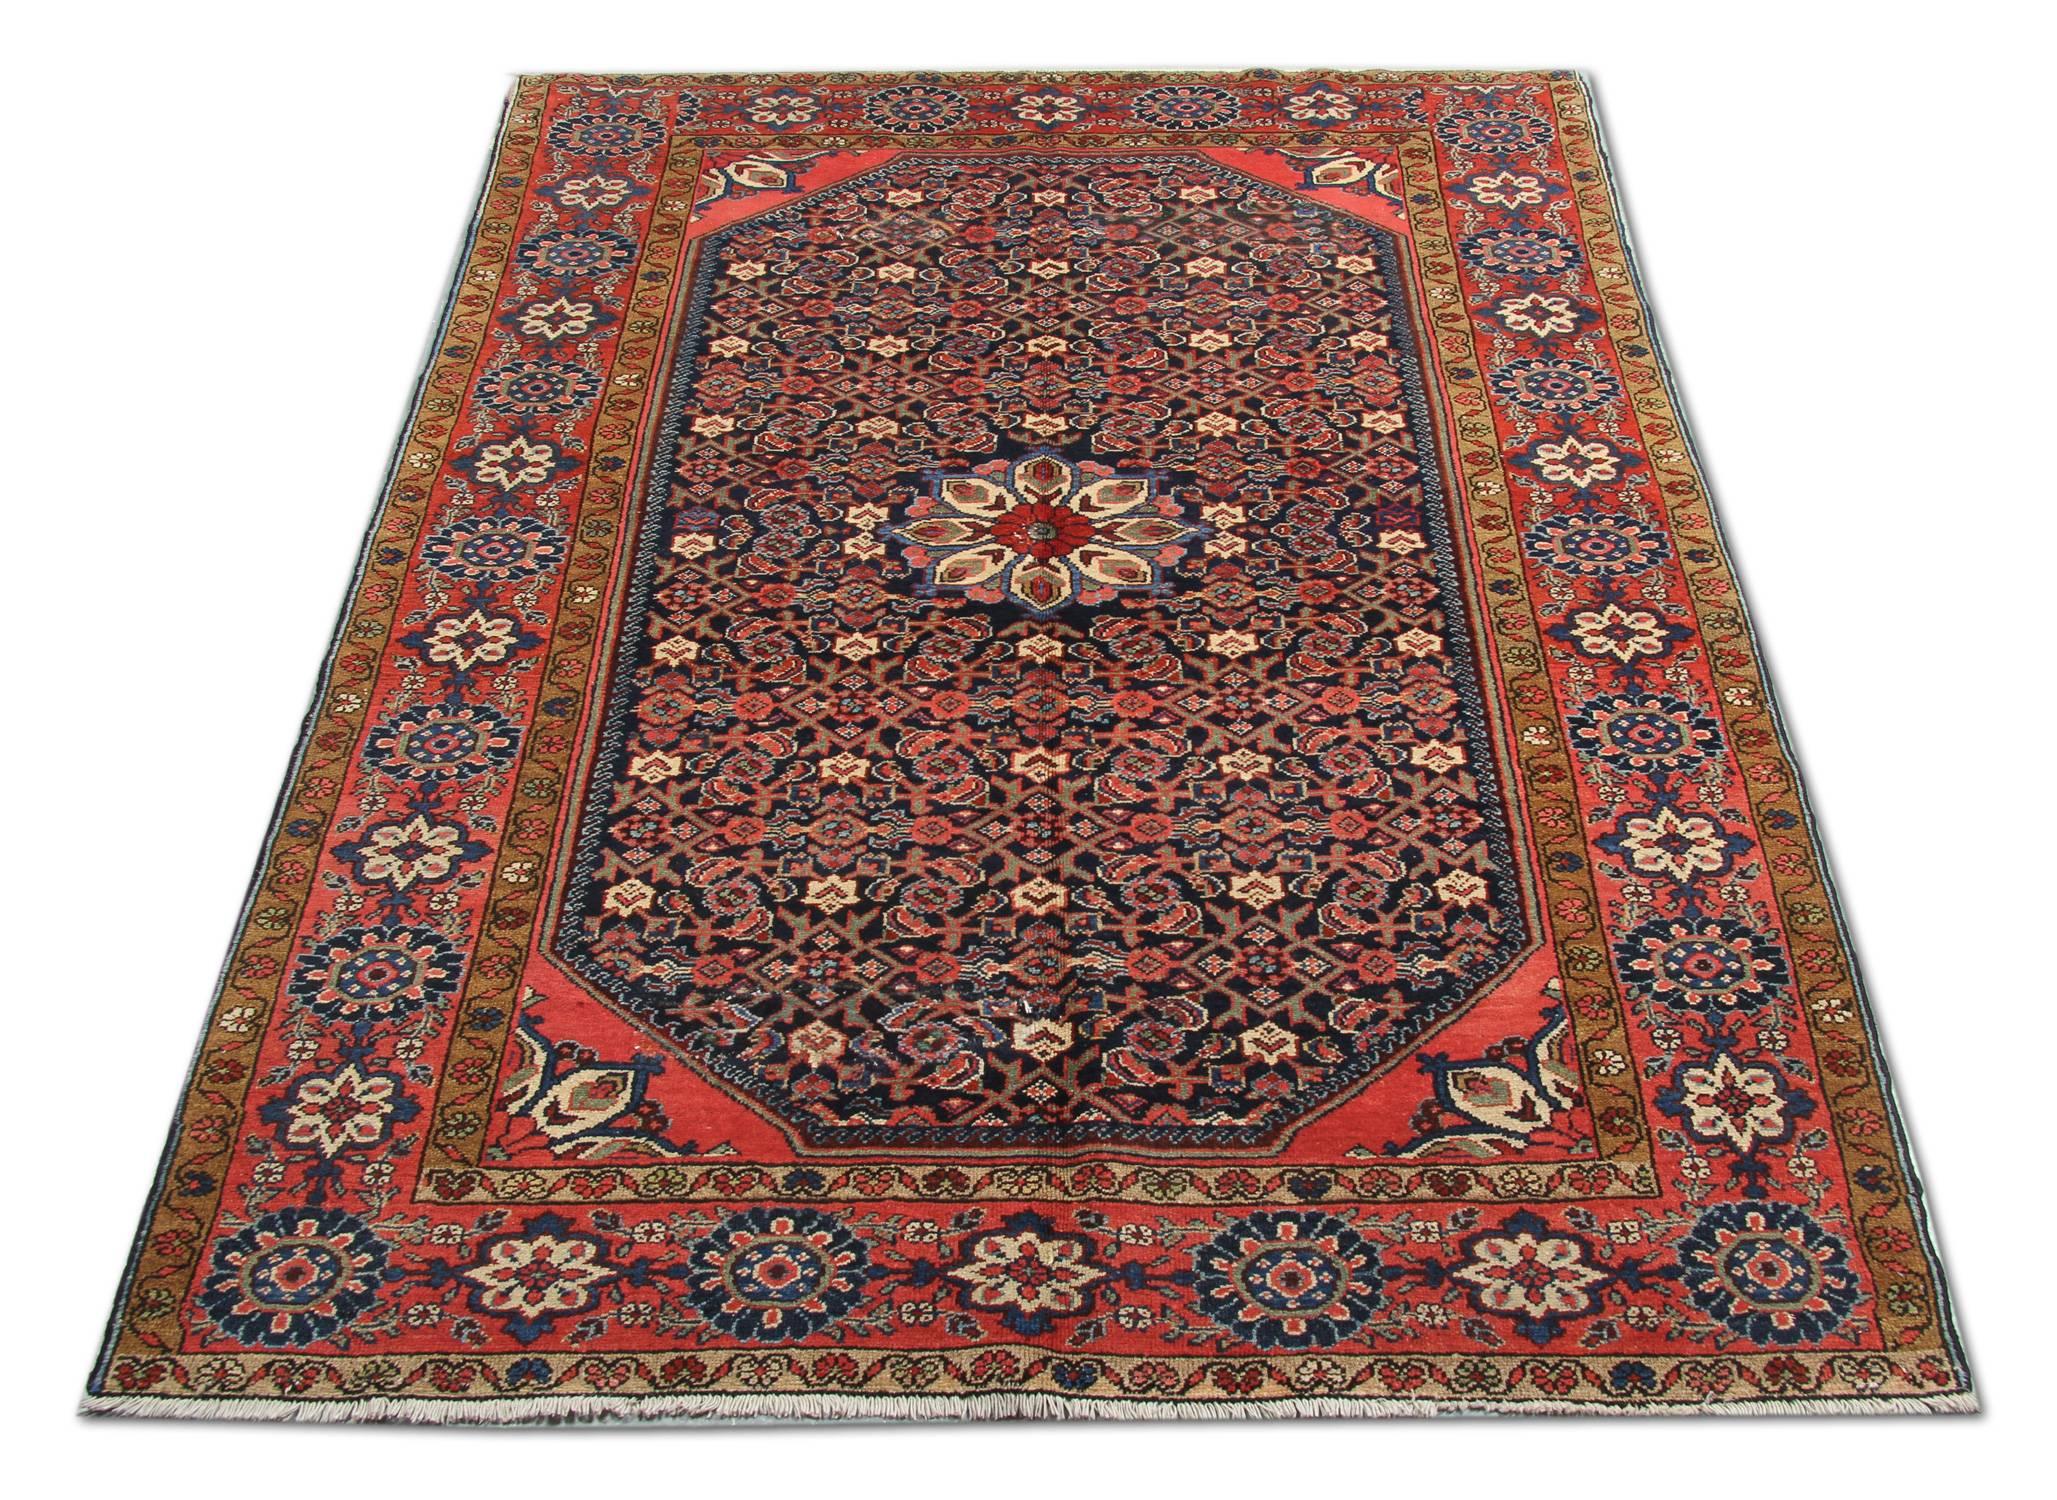 This is a Persian Bakhtiar woven in the late 1890s. A very decorative piece with subduing colors and great geometry of central medallion design. It is in excellent condition, nice even low pile and no repairs.